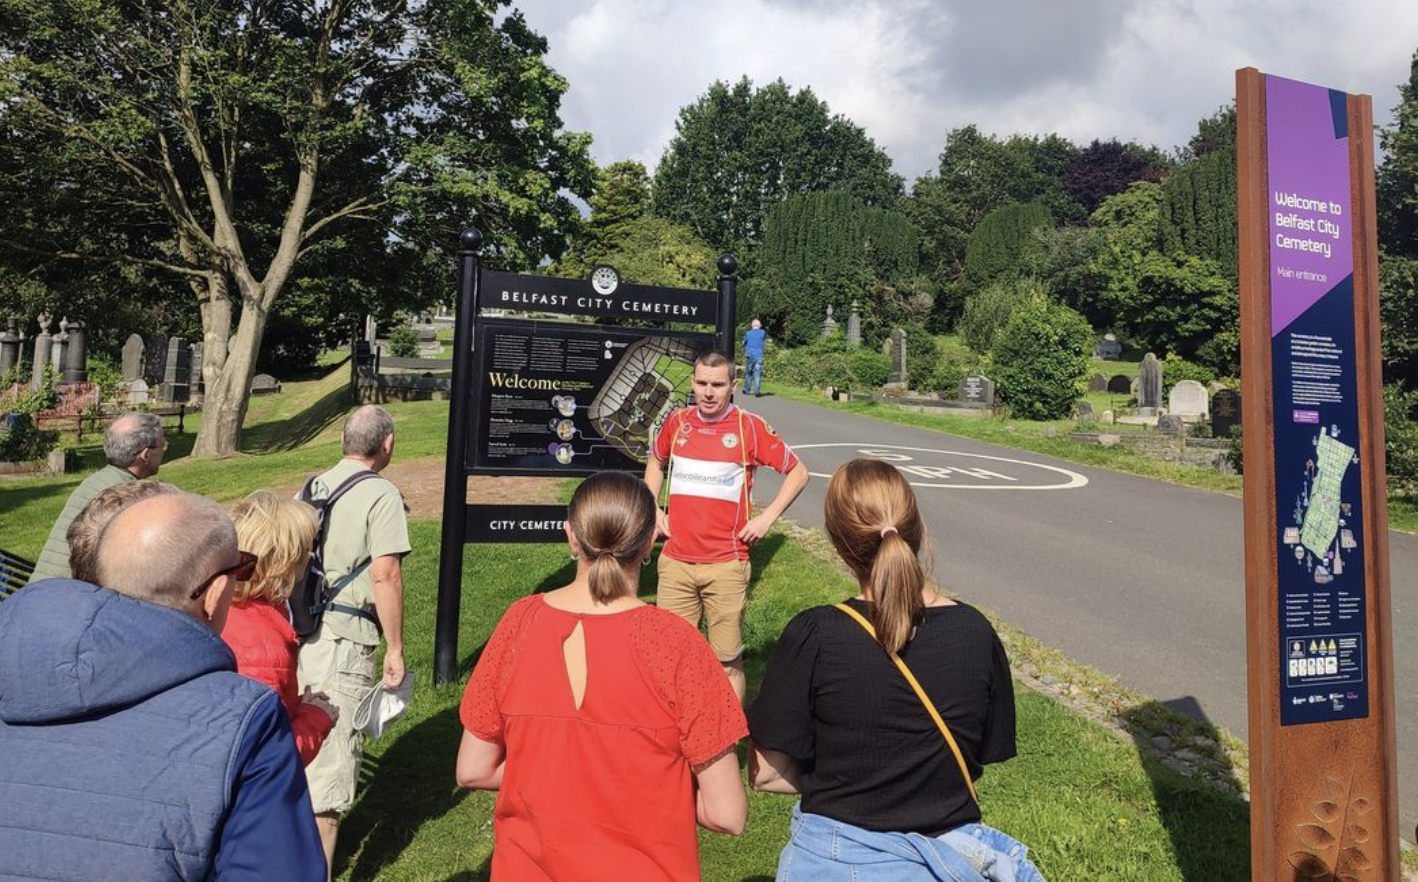 BUA: As well as updating signage in the cemetery to be bilingual, Belfast City Council have asked Seán Fennell to conduct his tours in Irish in the City Cemetery